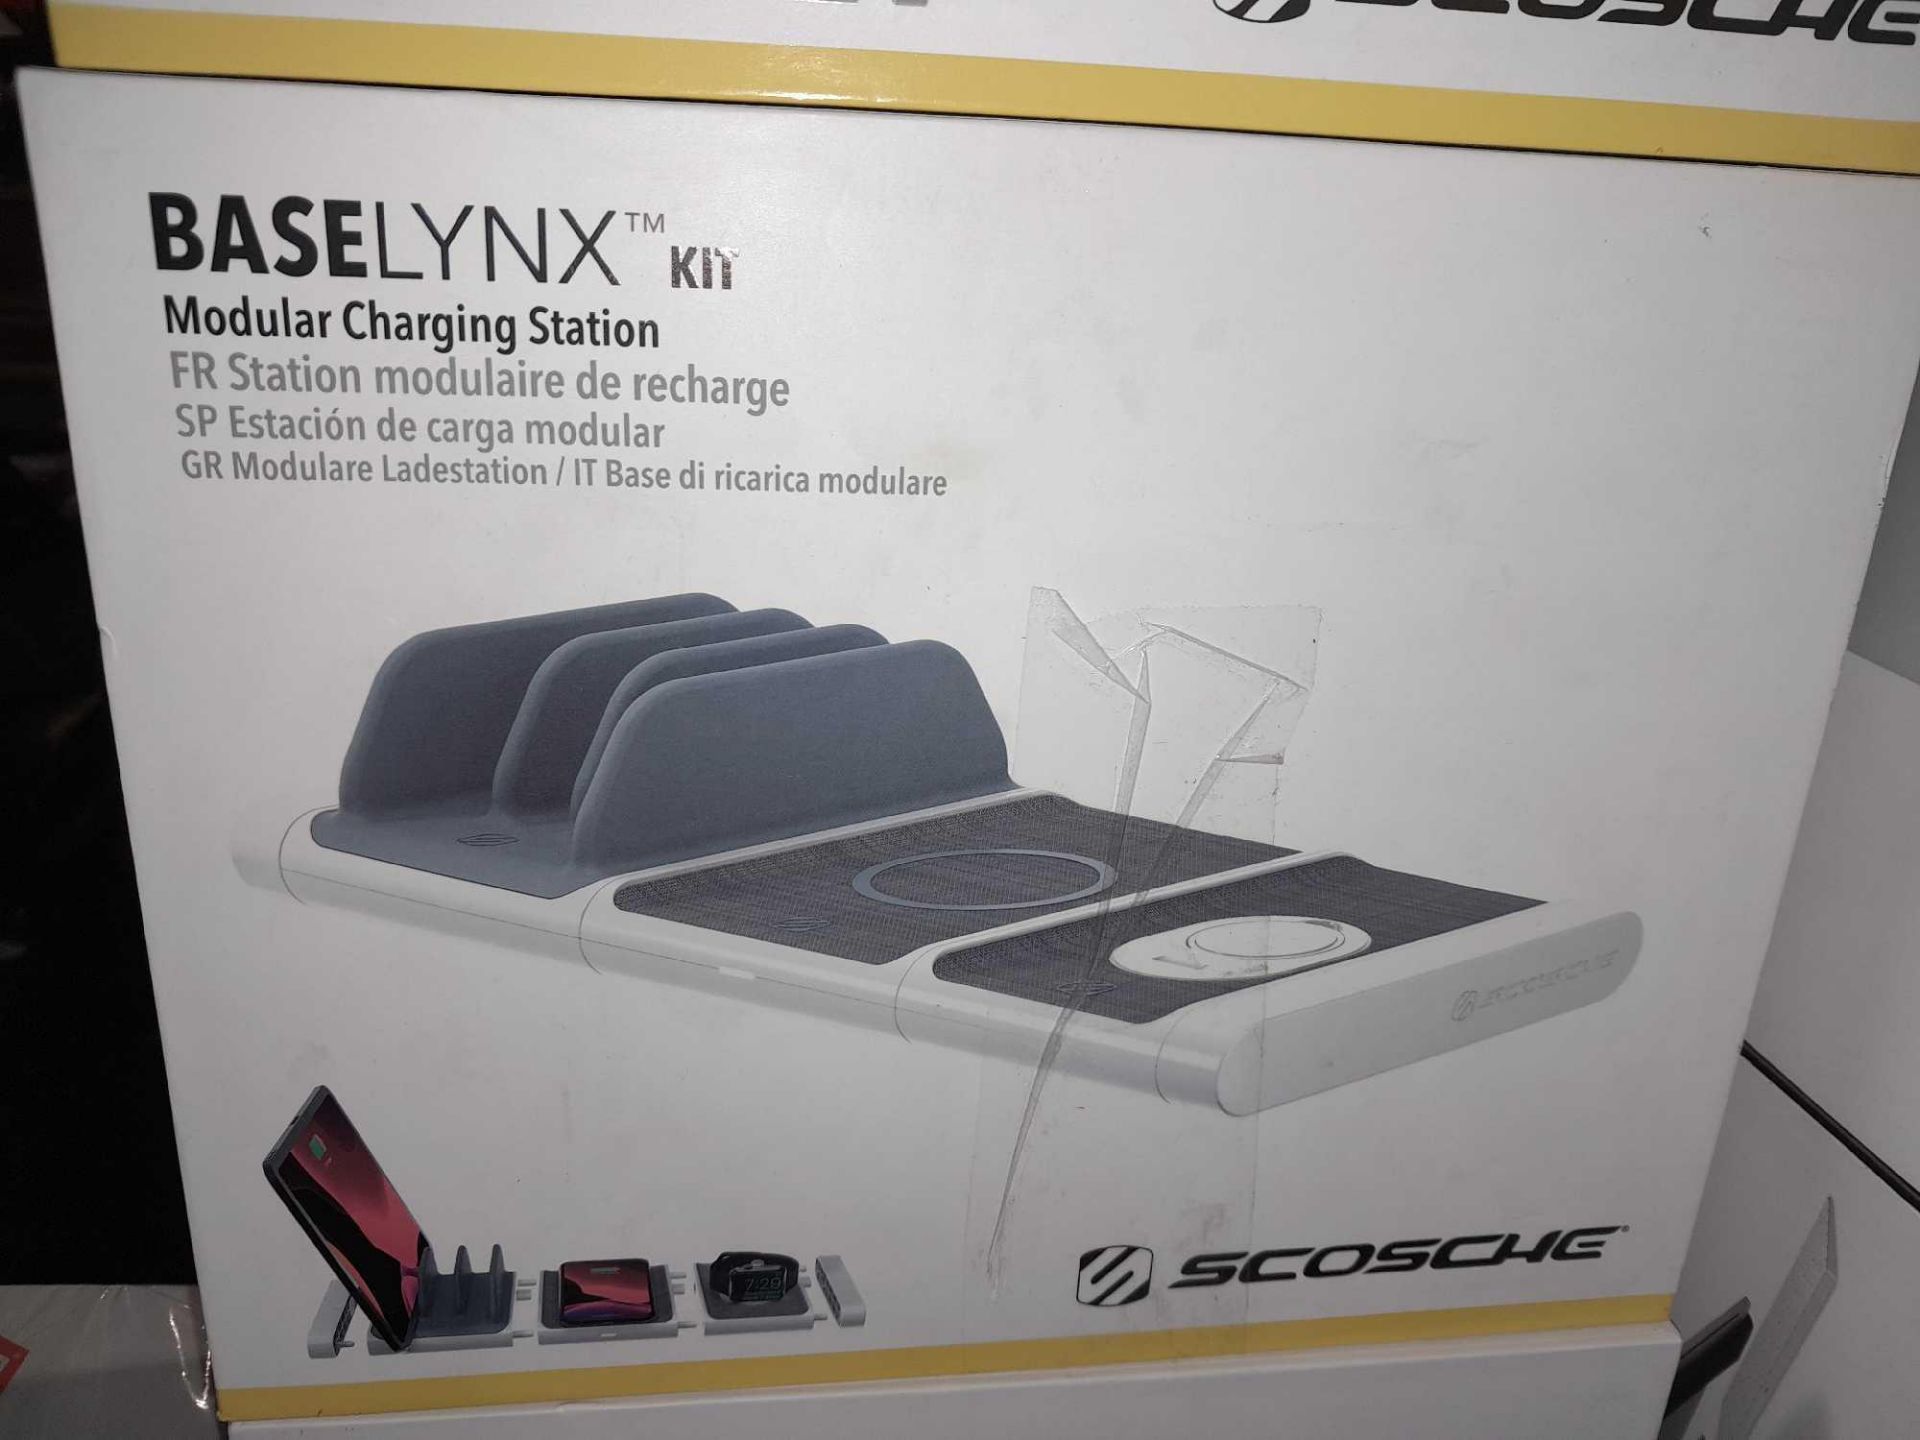 RRP £150 Boxed Scosche Base Lynx Kit, Modular Charging Station - Image 2 of 2